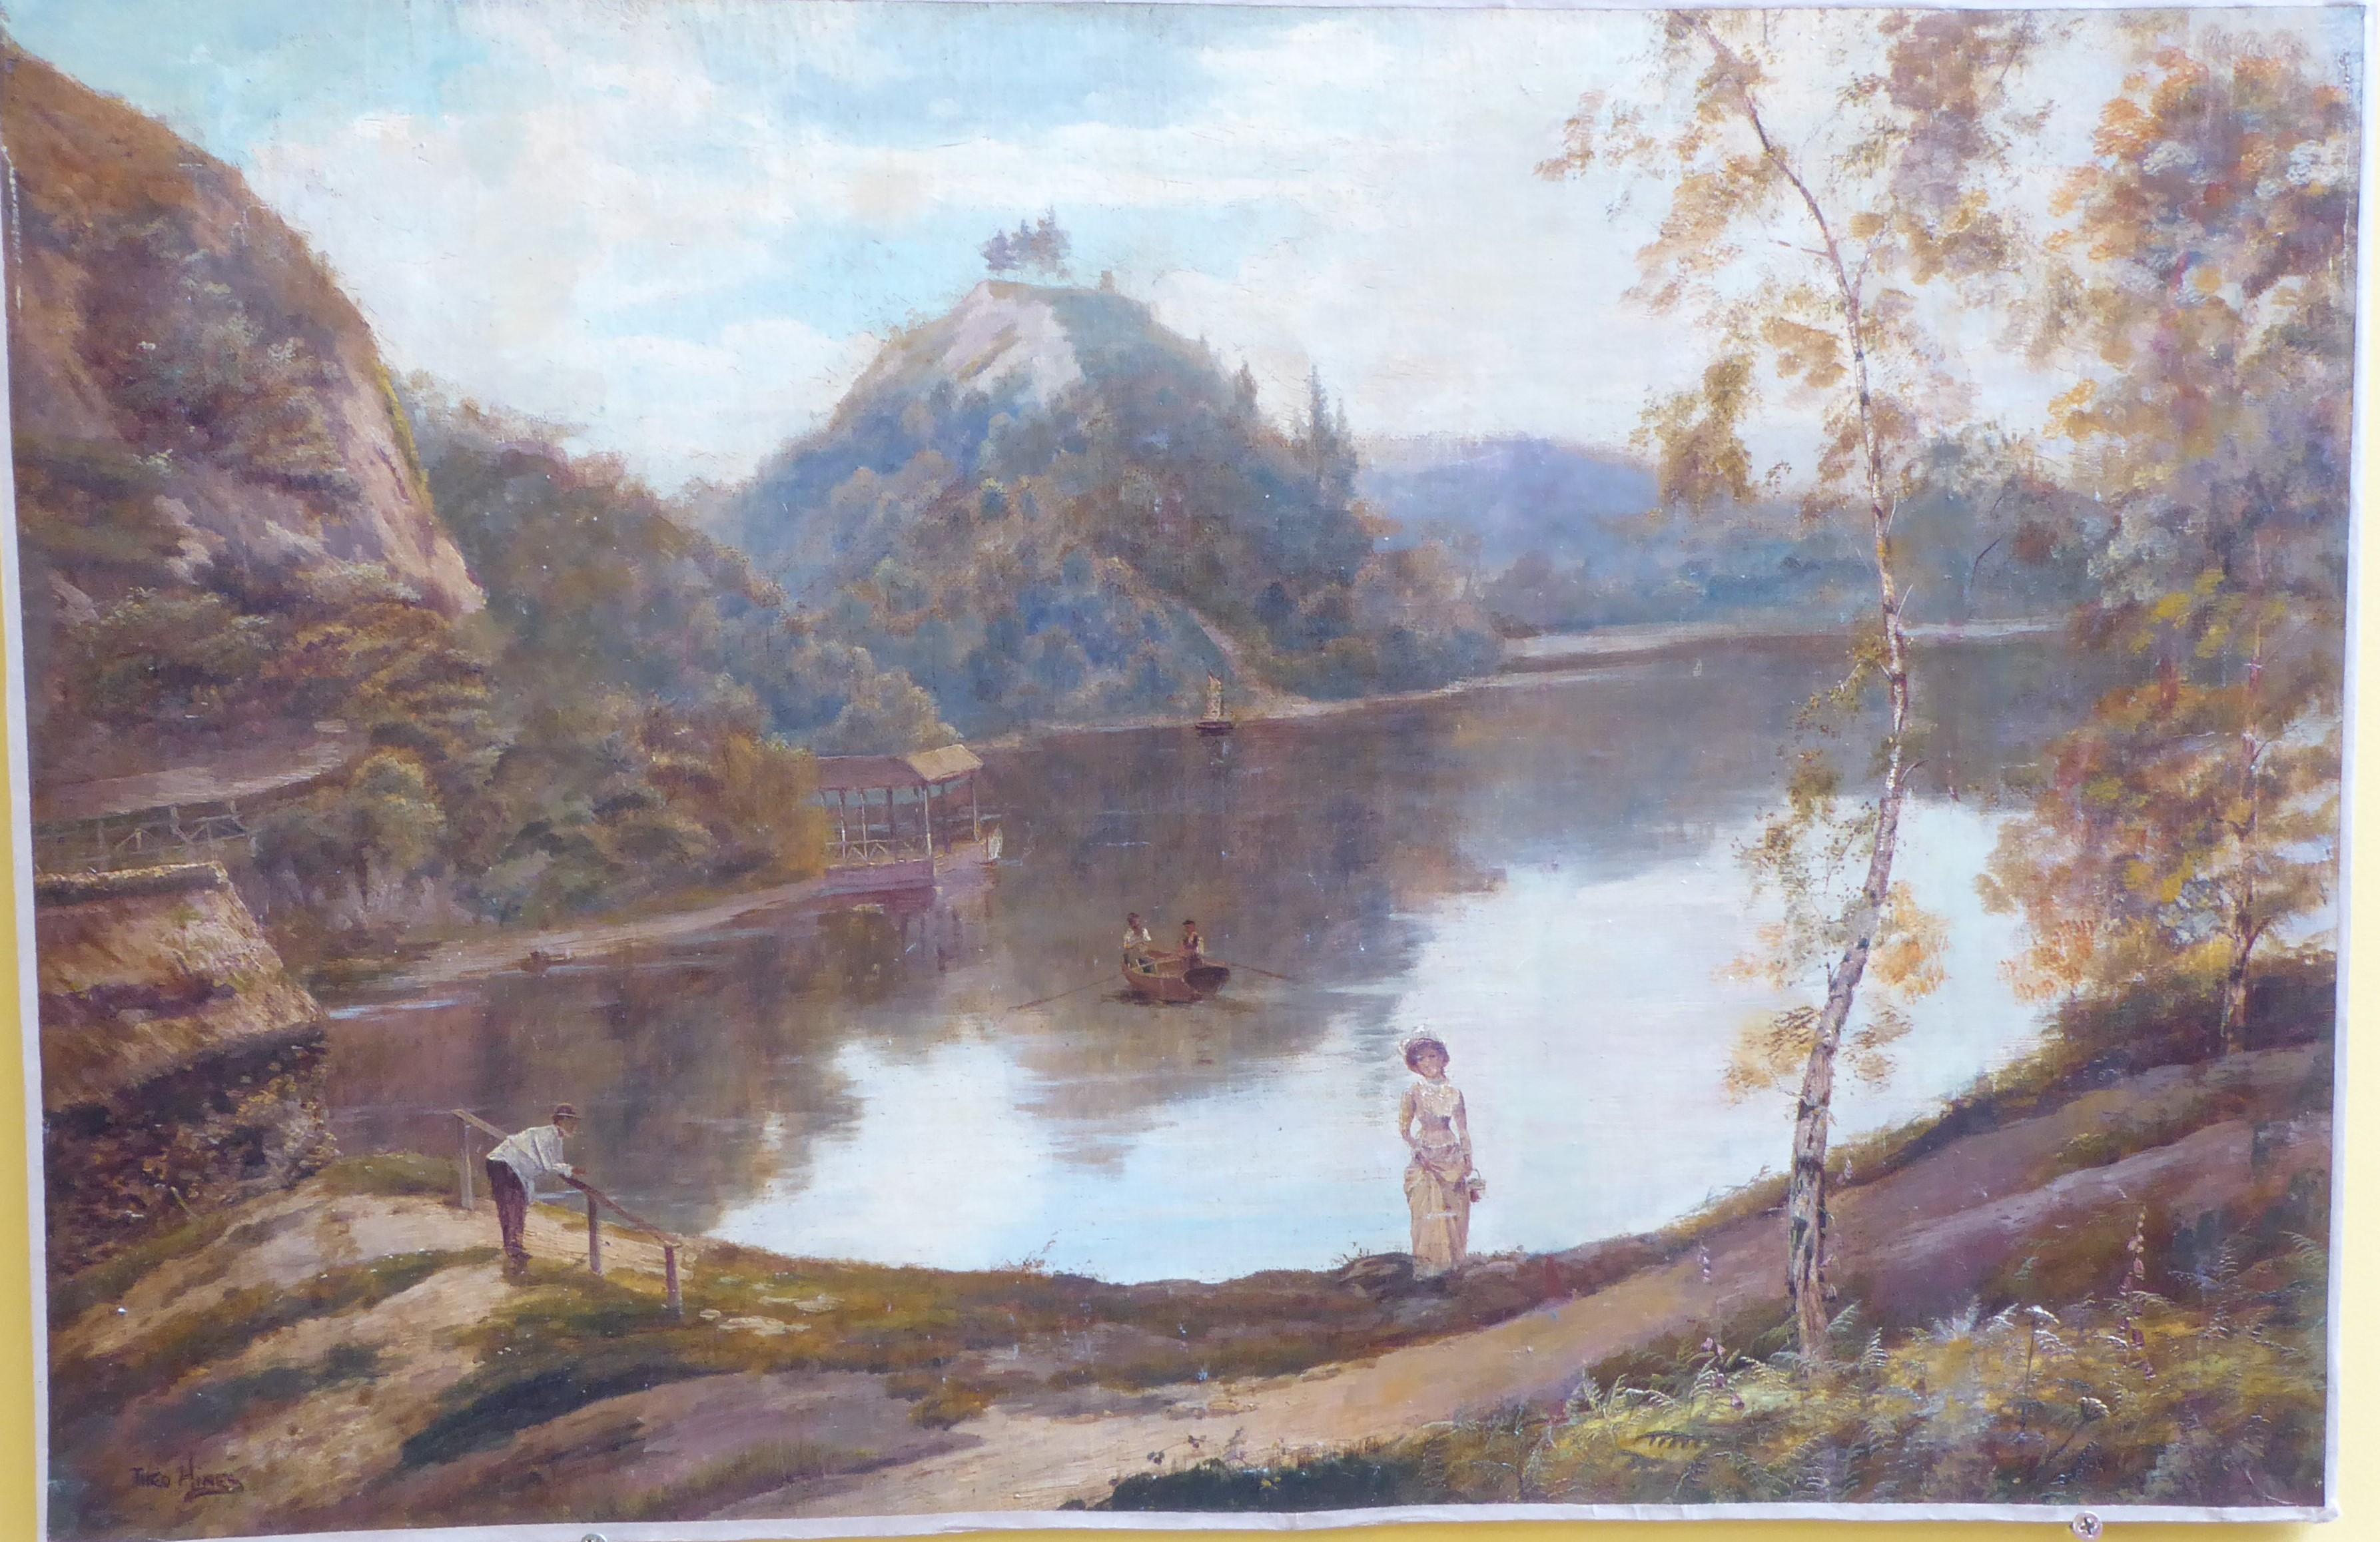 Pair of Oil Paintings by Theo Hines on Loch Katrine, Scotland.